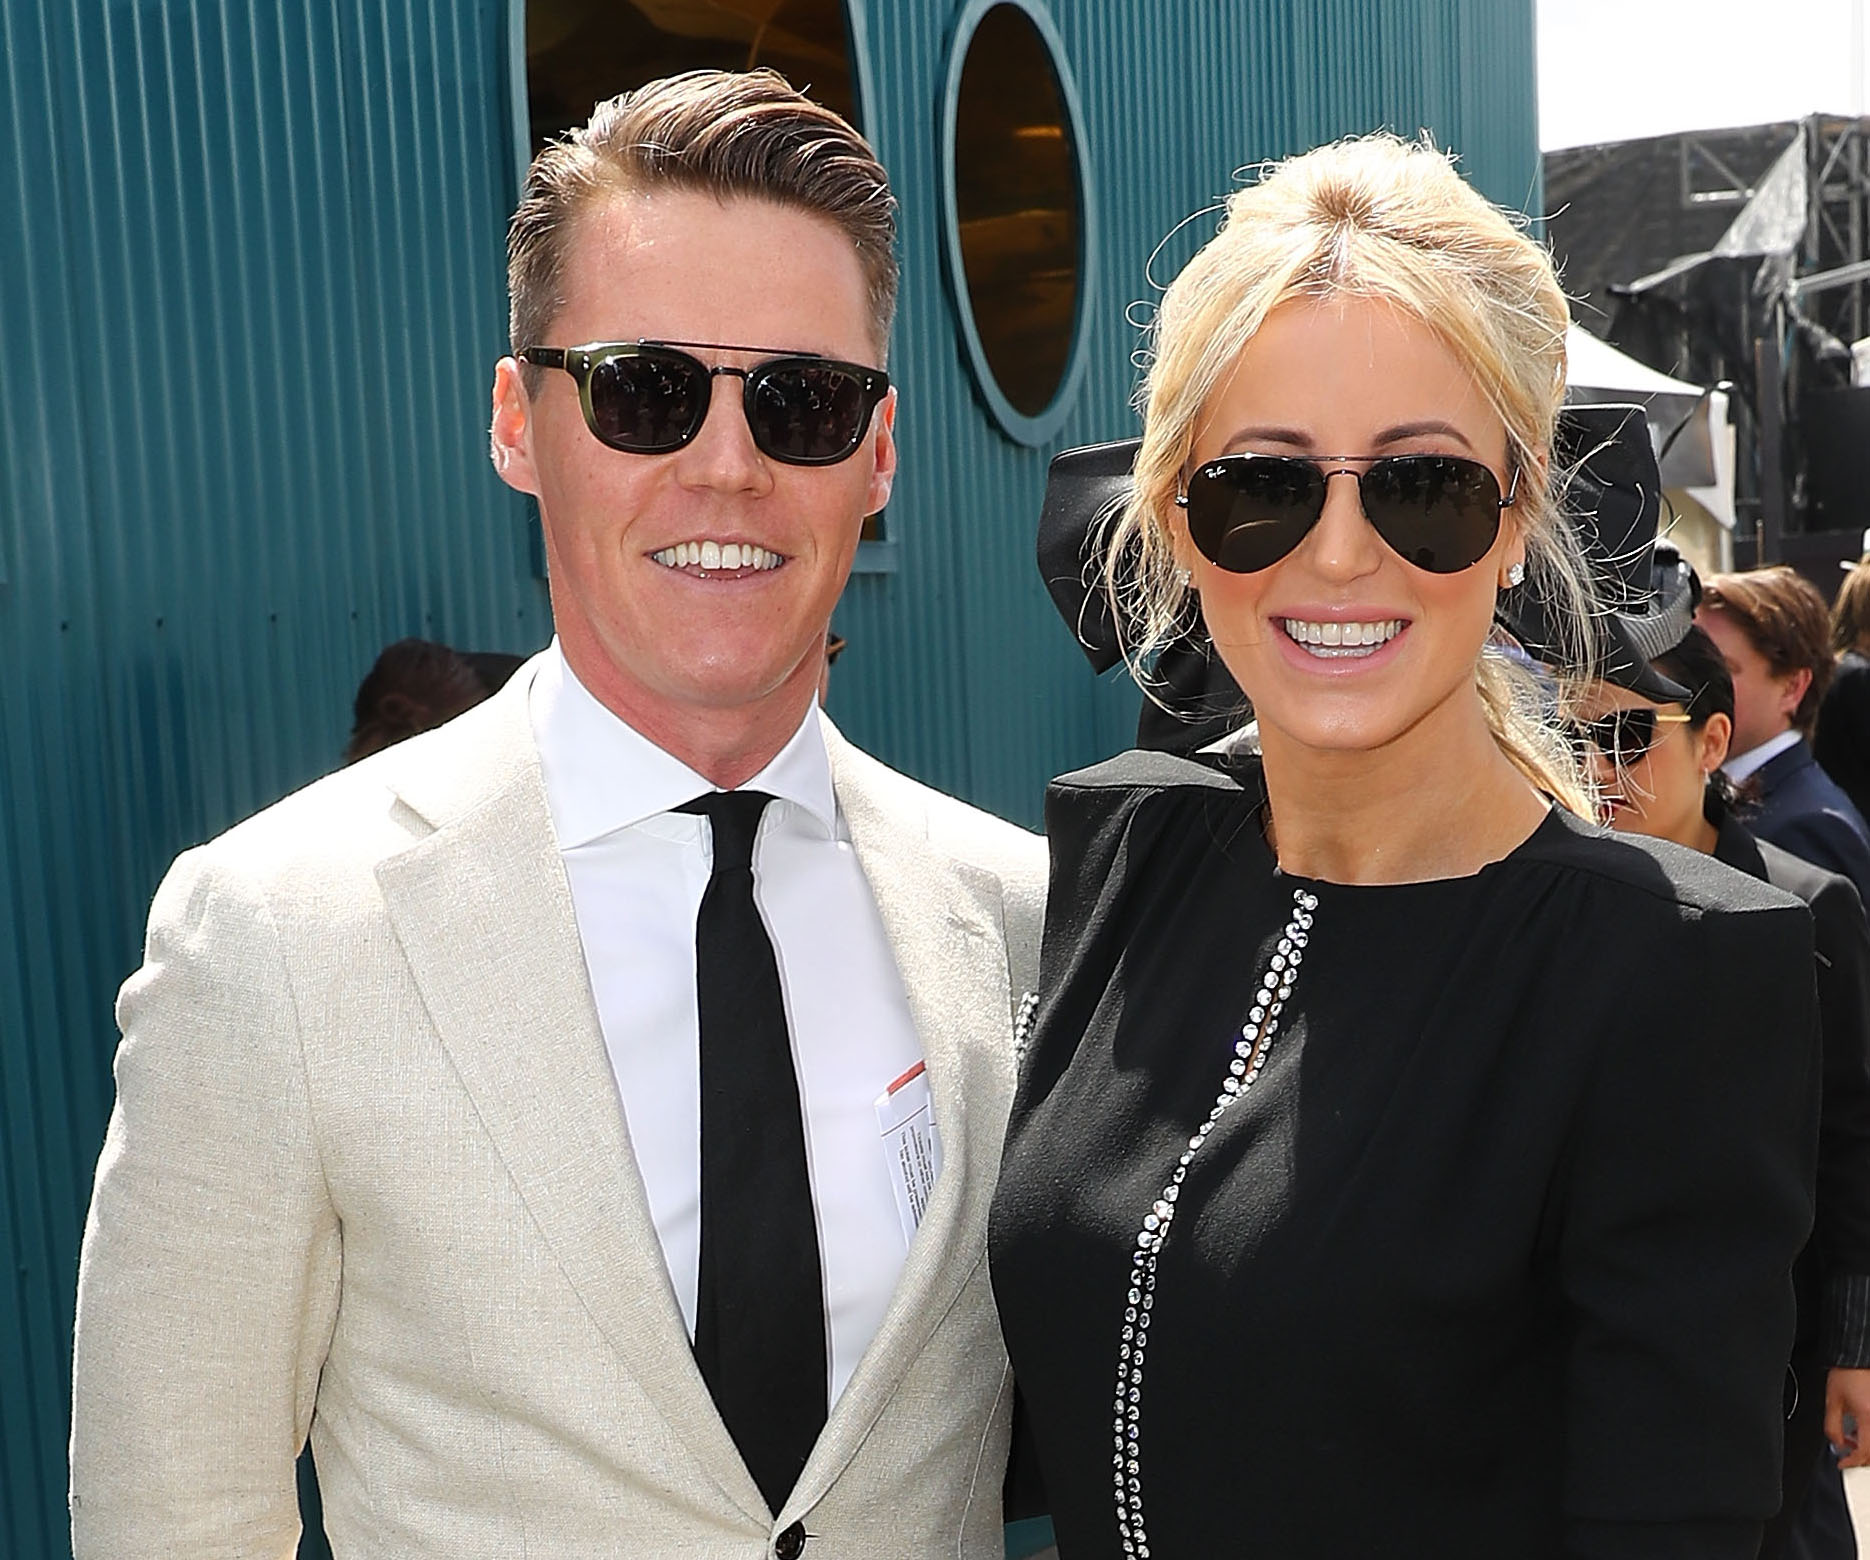 Roxy Jacenko & Oliver Curtis: Everything you need to know about the PR power couple